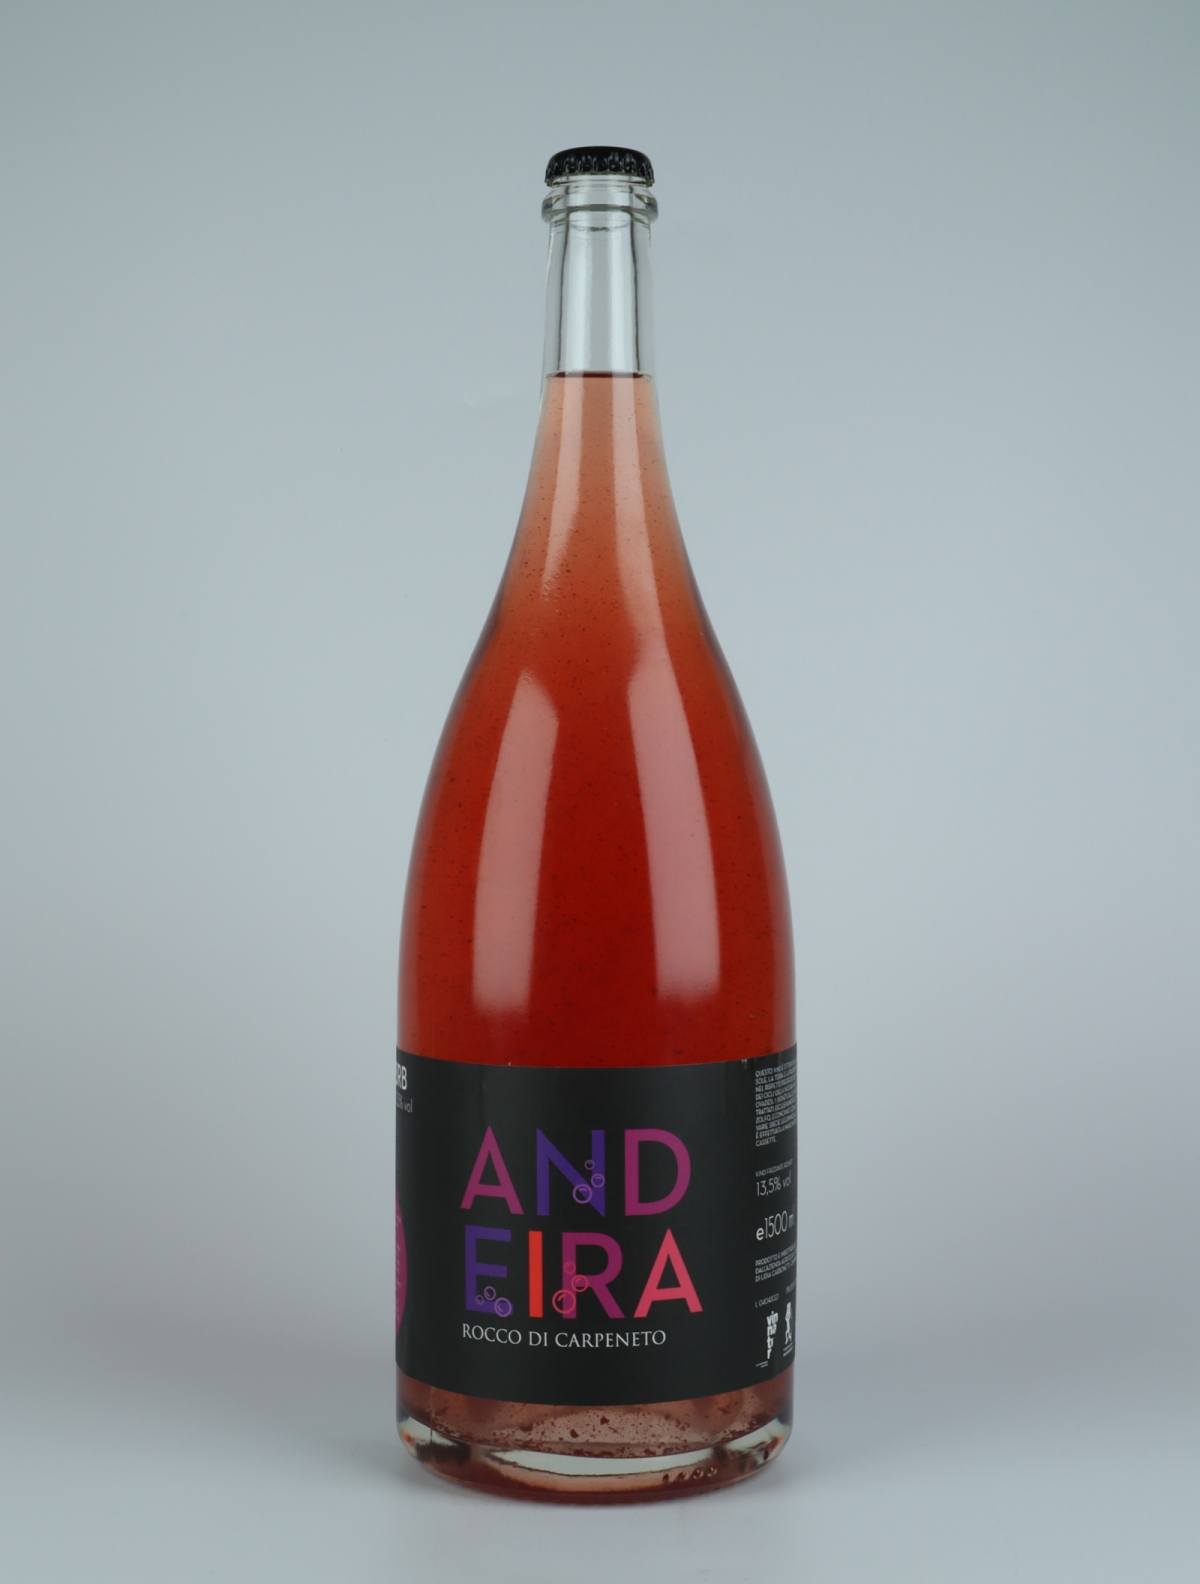 A bottle 2021 Andeira Sparkling from Rocco di Carpeneto, Piedmont in Italy